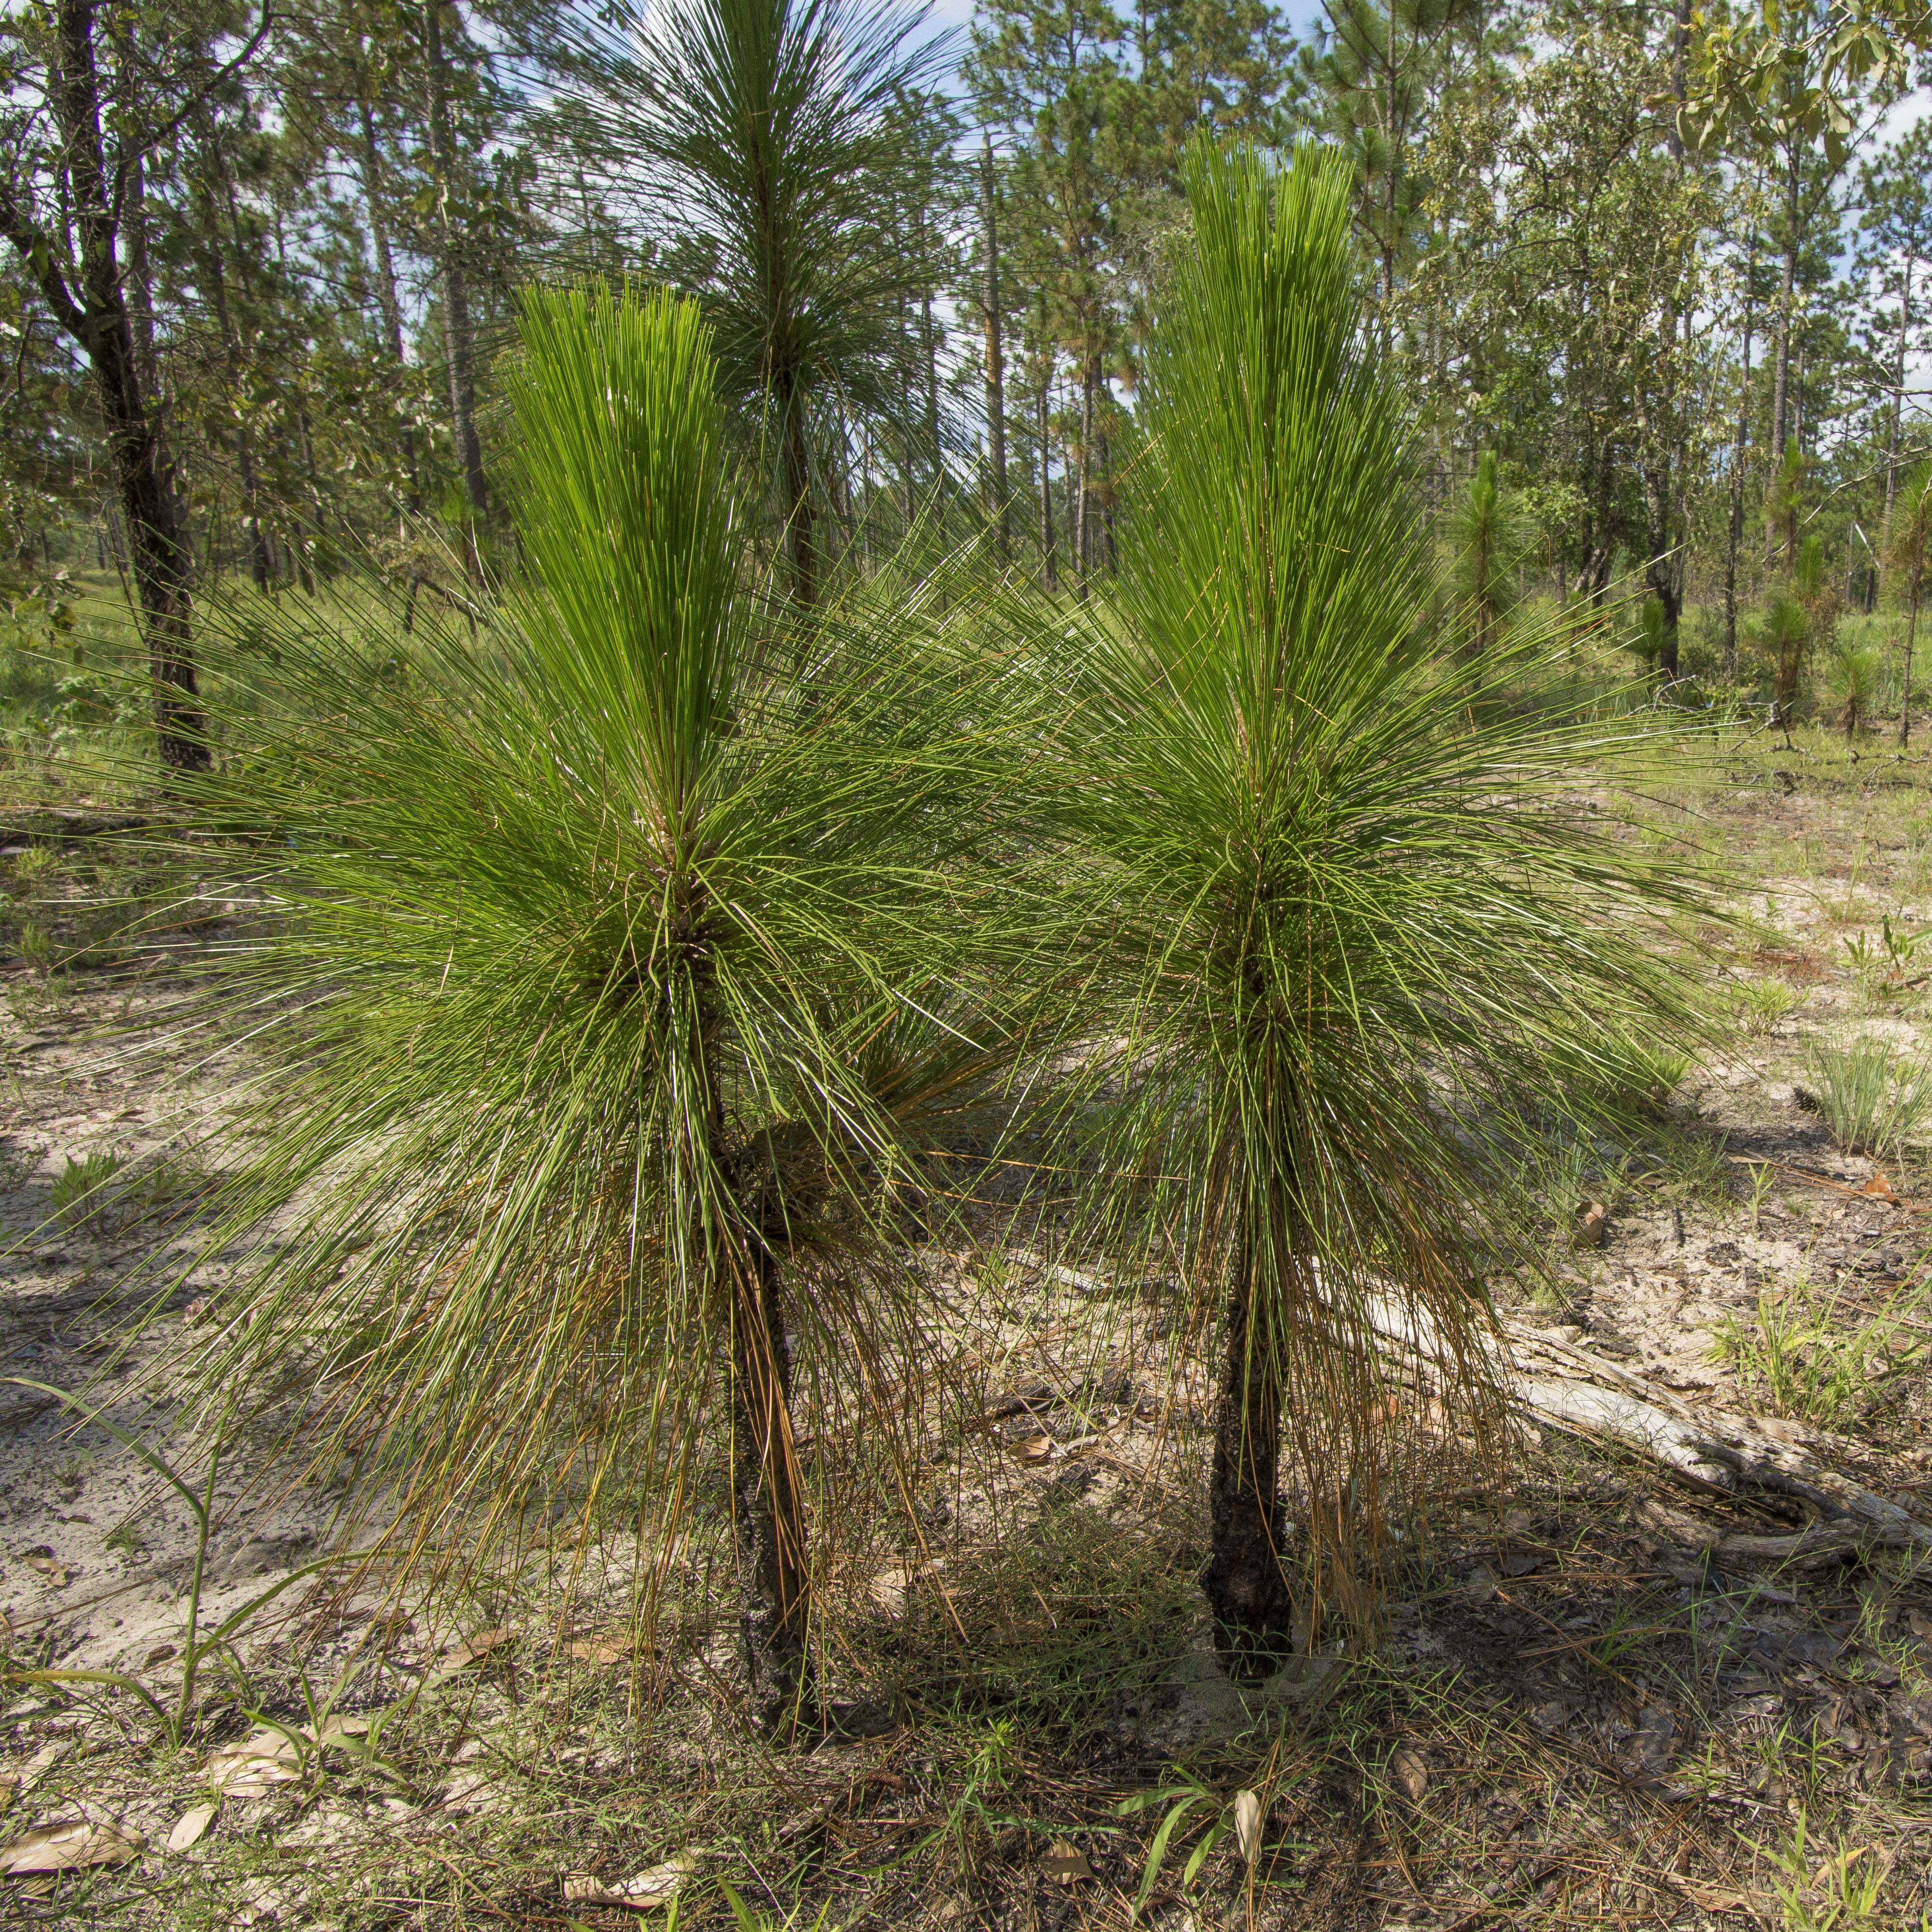 Two pine tree seedlings with thick, green needles.